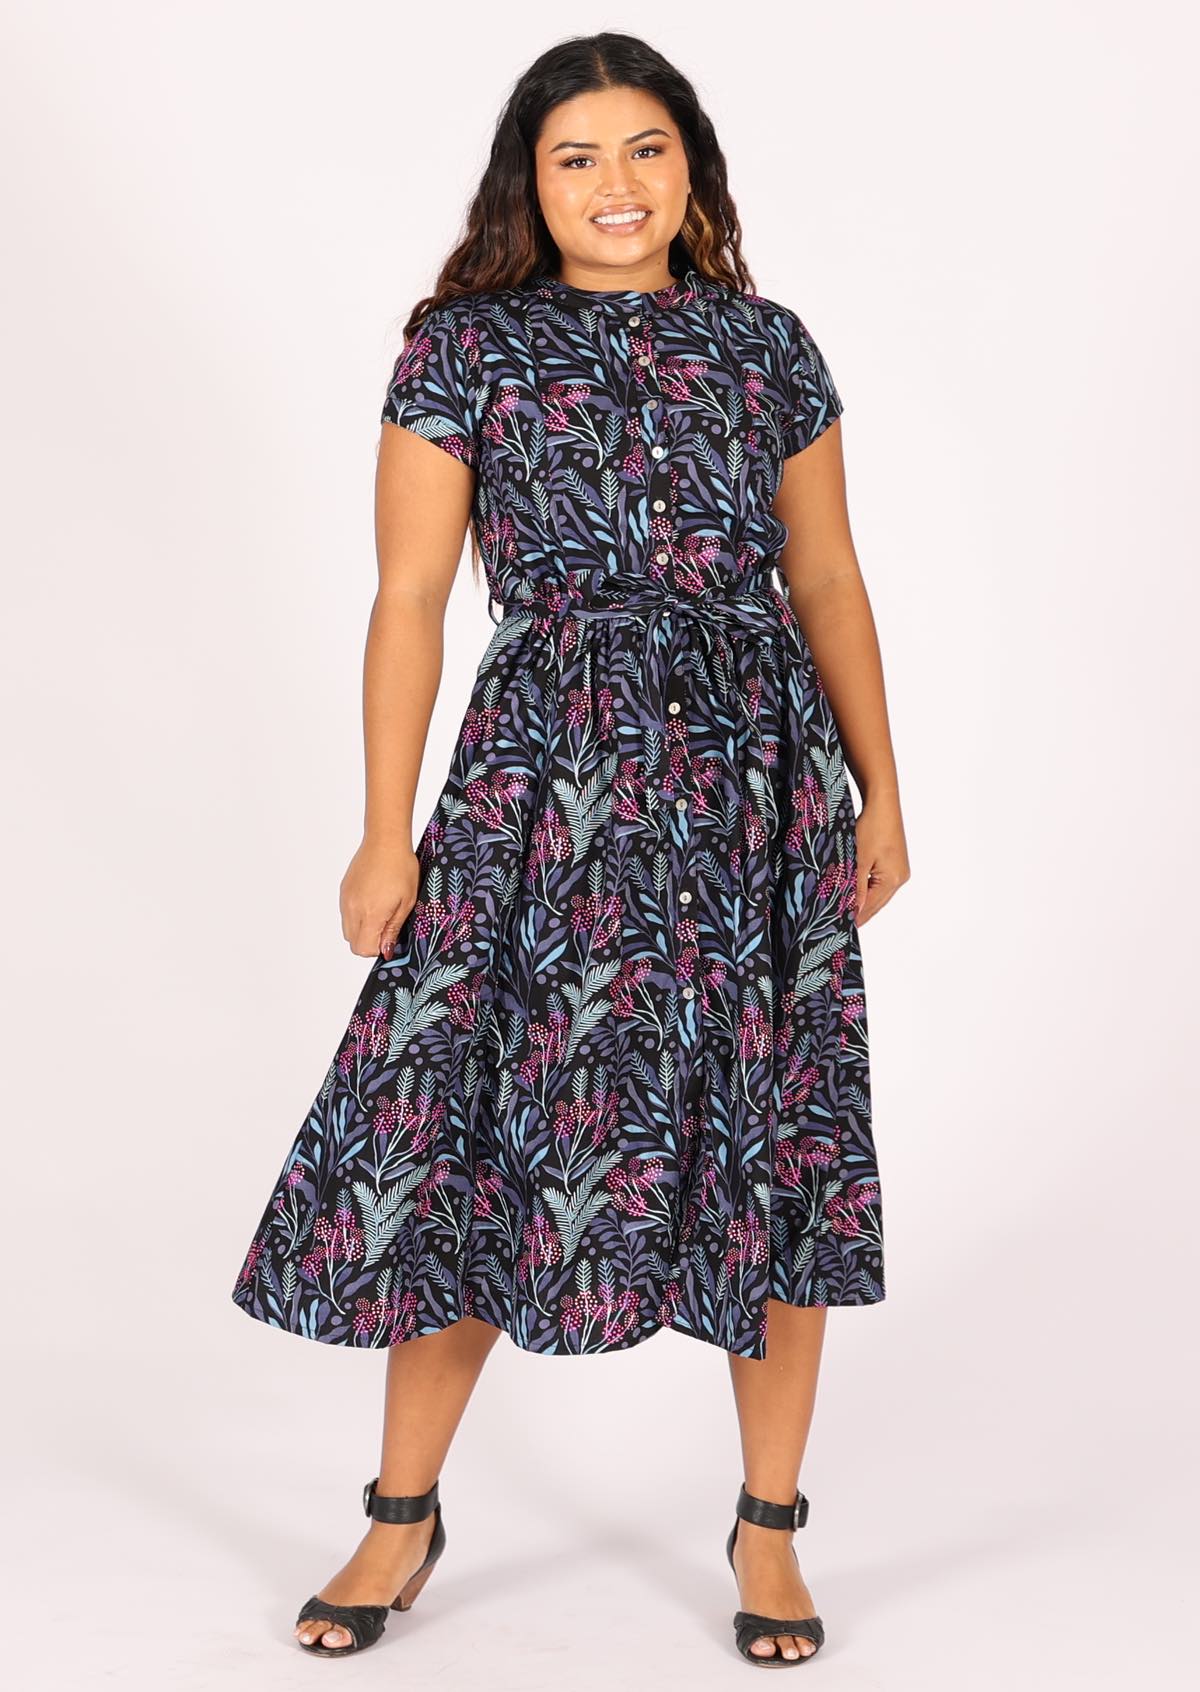 Black based botanical print in blues and pinks cotton retro dress